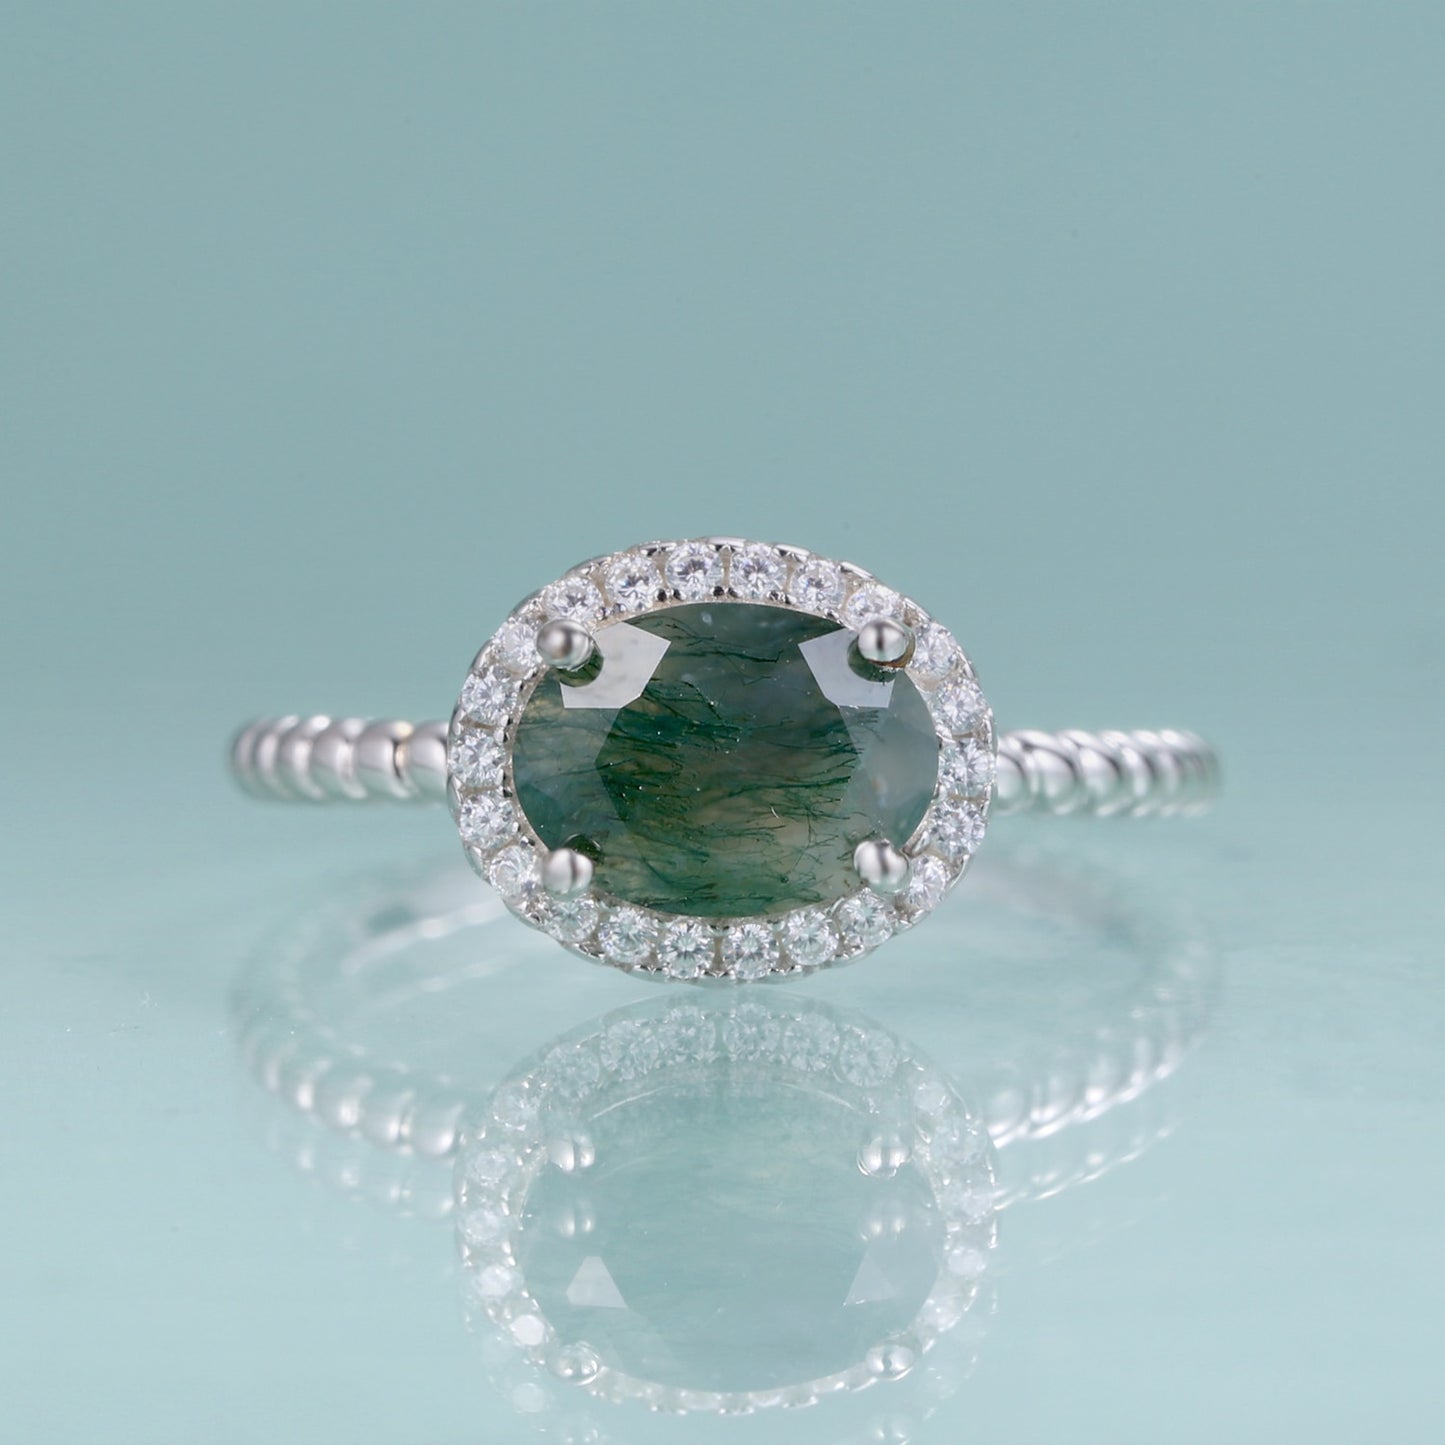 GEM&#39;S BALLET 1.3CT Oval Cut Moss Agate Gemstone Engagement Rings in 925 Sterling Silver Handmade Stripes Ring Gift For Her Moss Agate-S|925 Sterling Silver